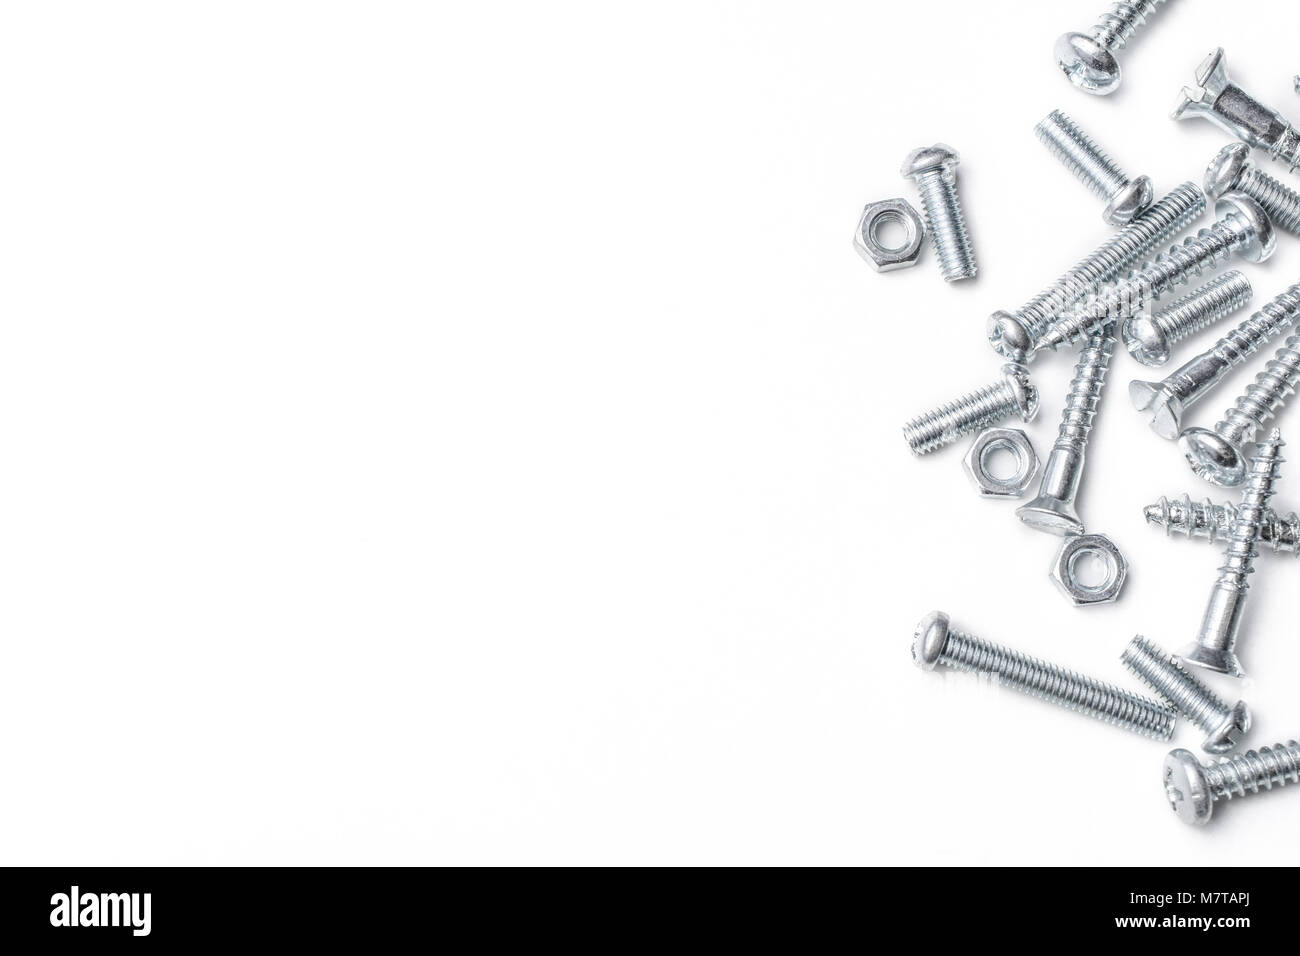 Collection Of Iron Screws And Bolts At The Right Edge Of A Whitebox Stock Photo